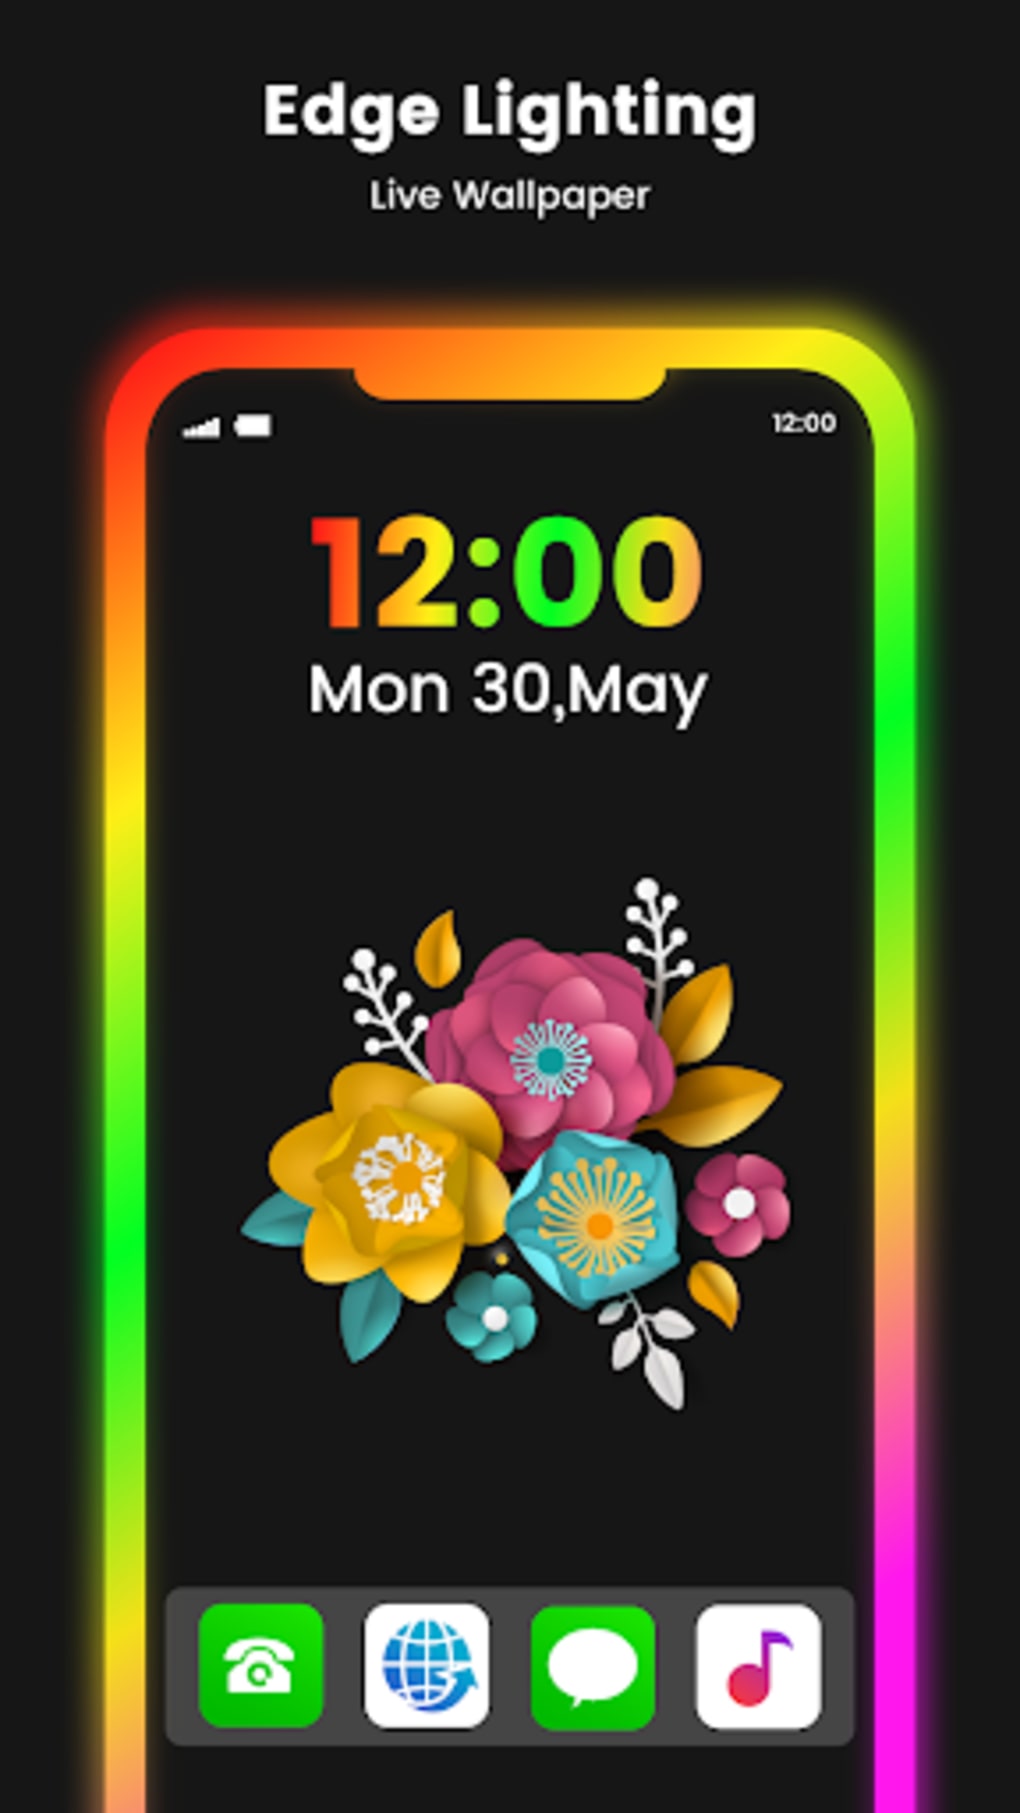 15 Best Live Wallpaper Apps For Android in 2023